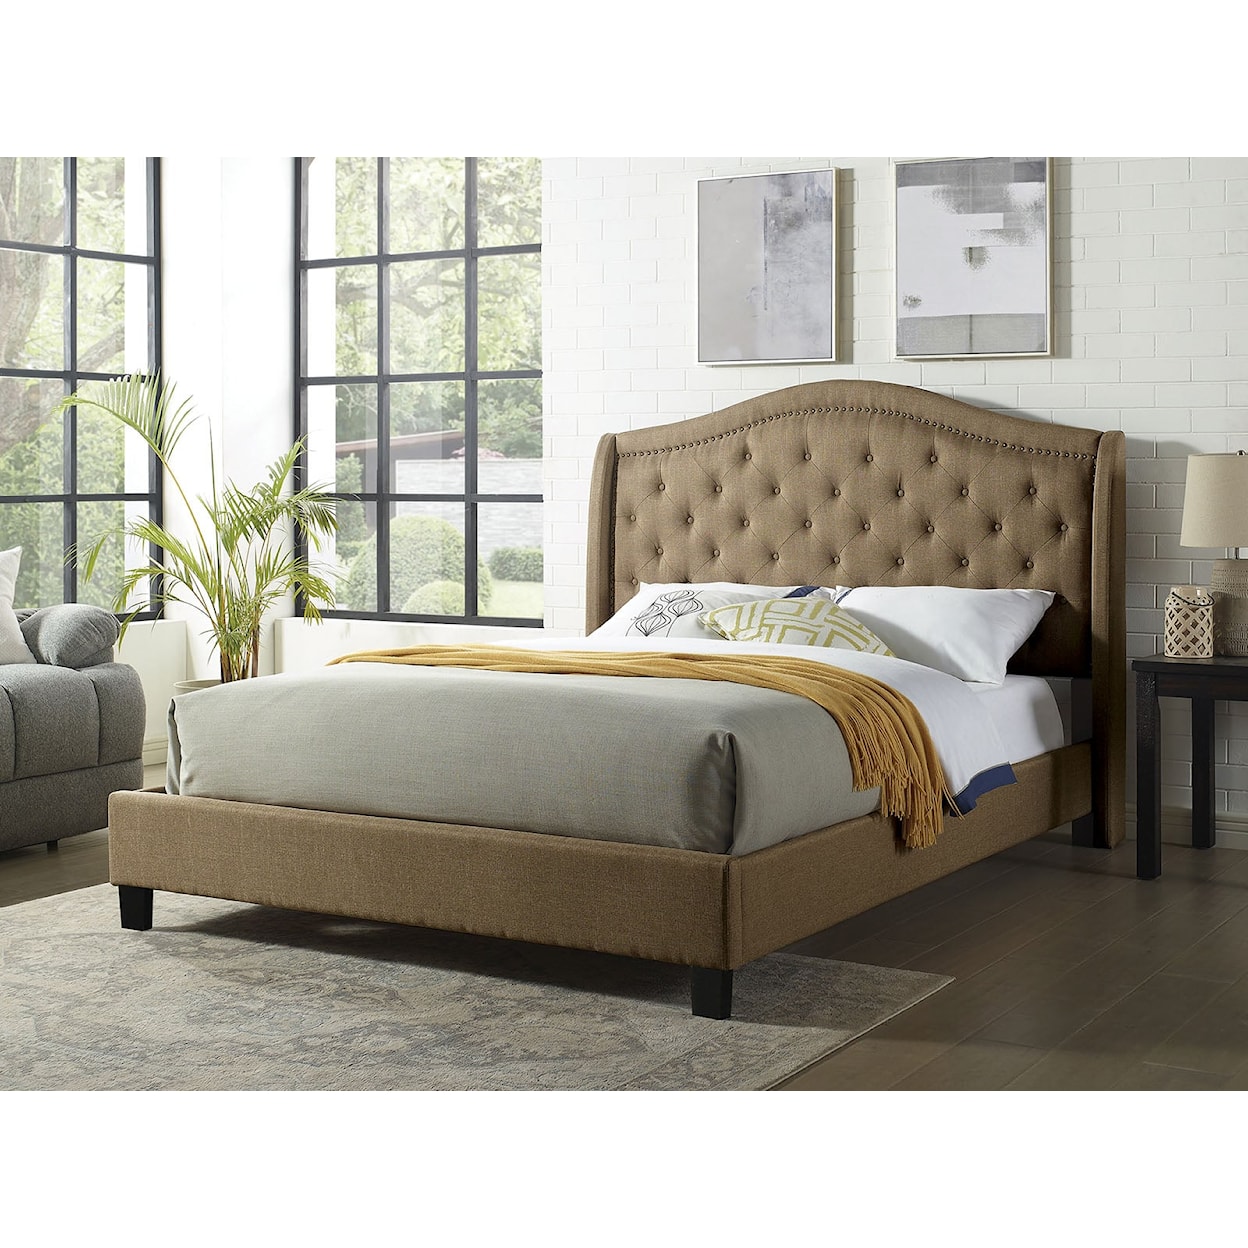 FUSA Carly Full Bed, Brown